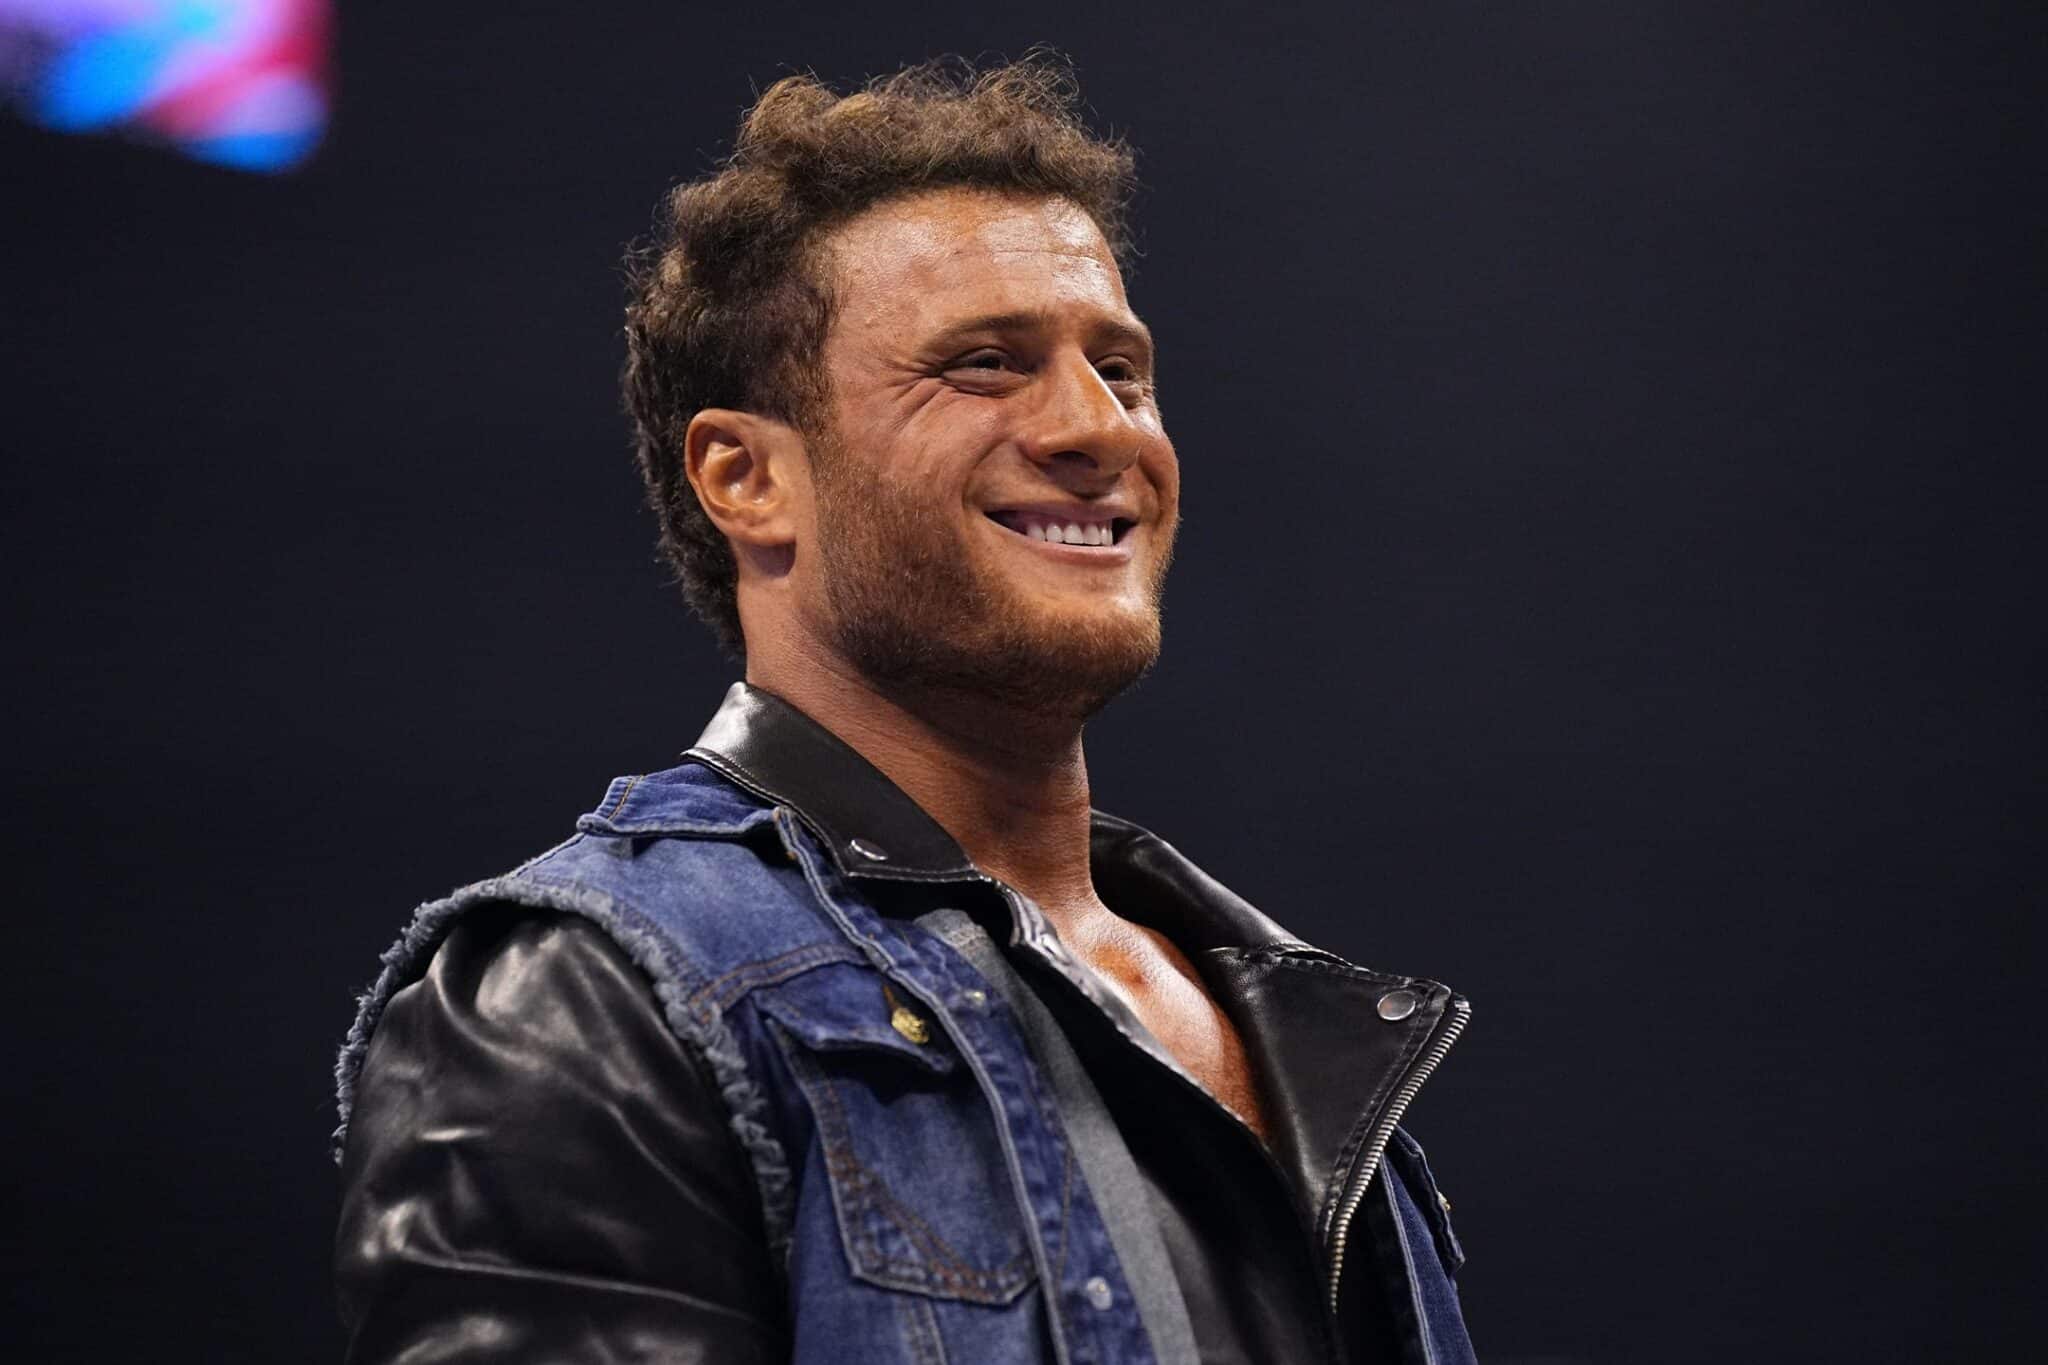 MJF returns to his formidable villain role, striking Daniel Garcia, with lineups of AEW Rampage/Collision announced.